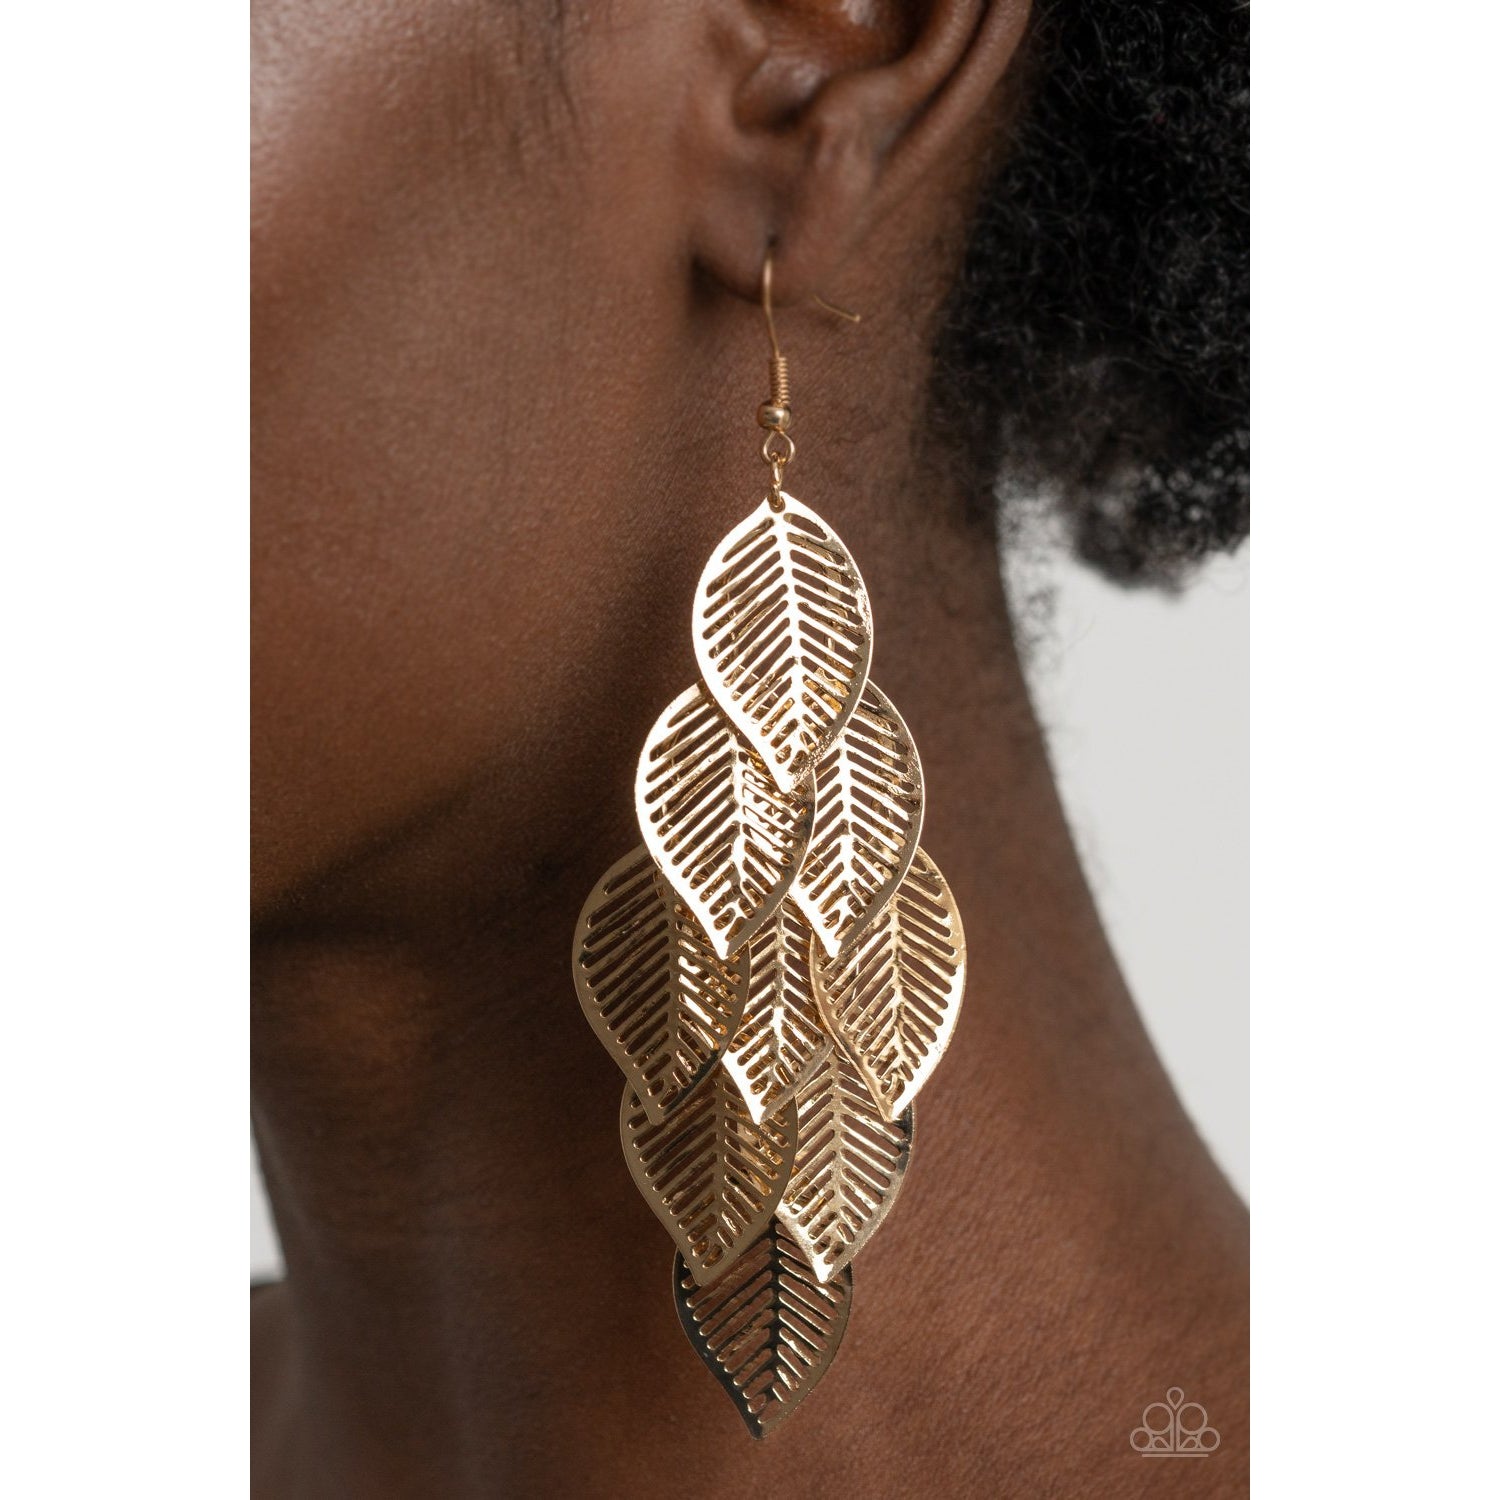 Limitlessly Leafy - Gold Earrings - Paparazzi Accessories - GlaMarous Titi Jewels